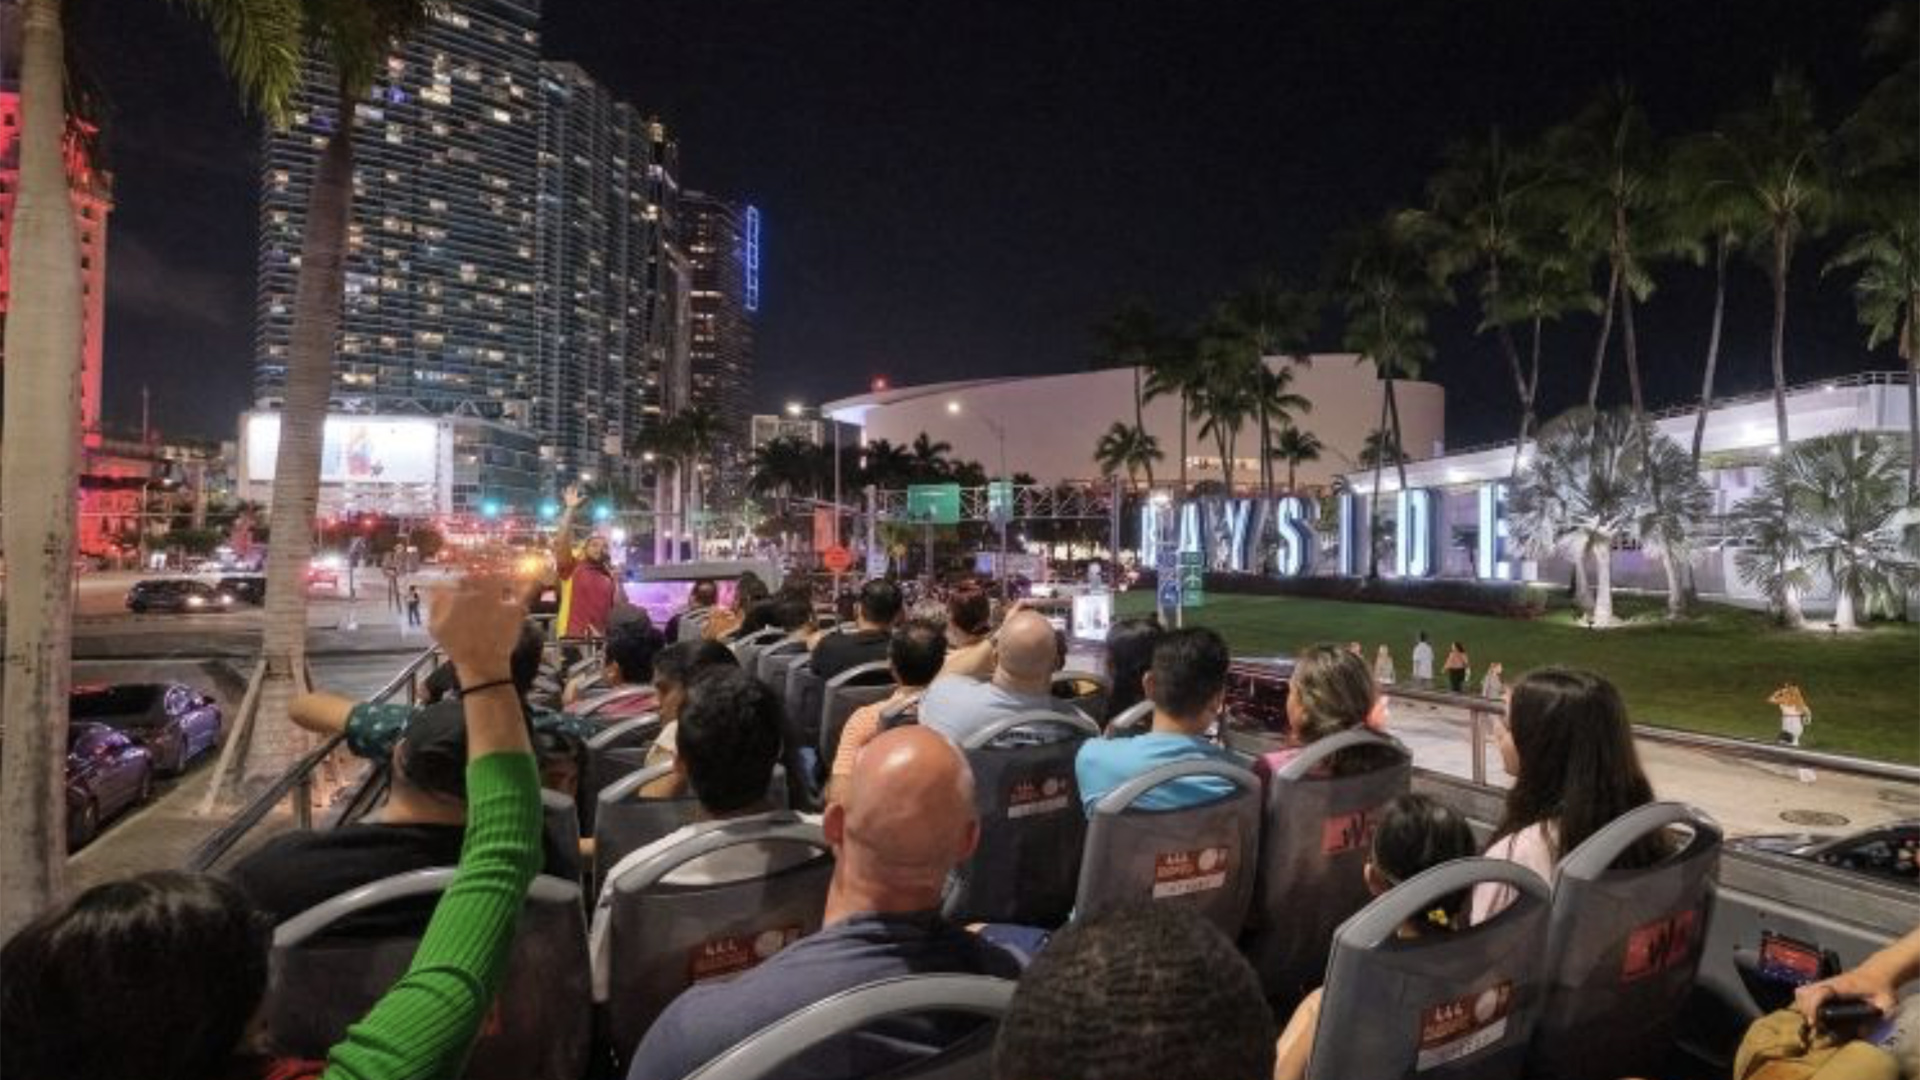 Grab your cameras for amazing night time photos of Miami.